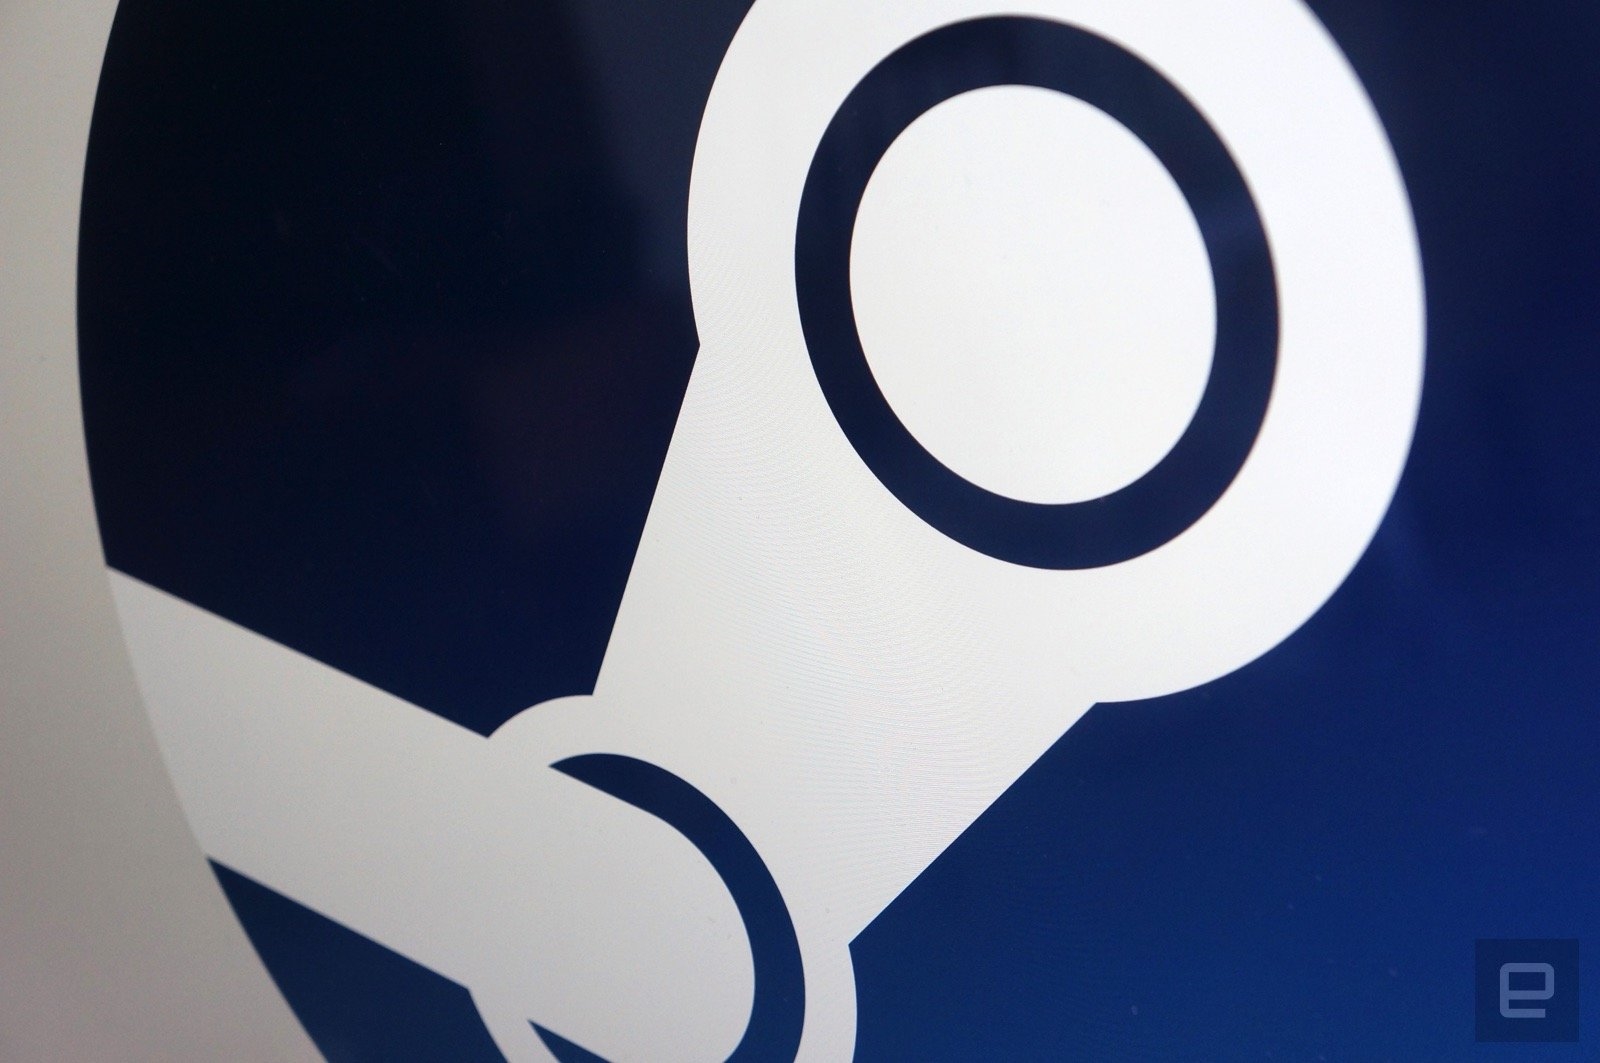 Steam limits game auto-updates to manage peak demand | DeviceDaily.com